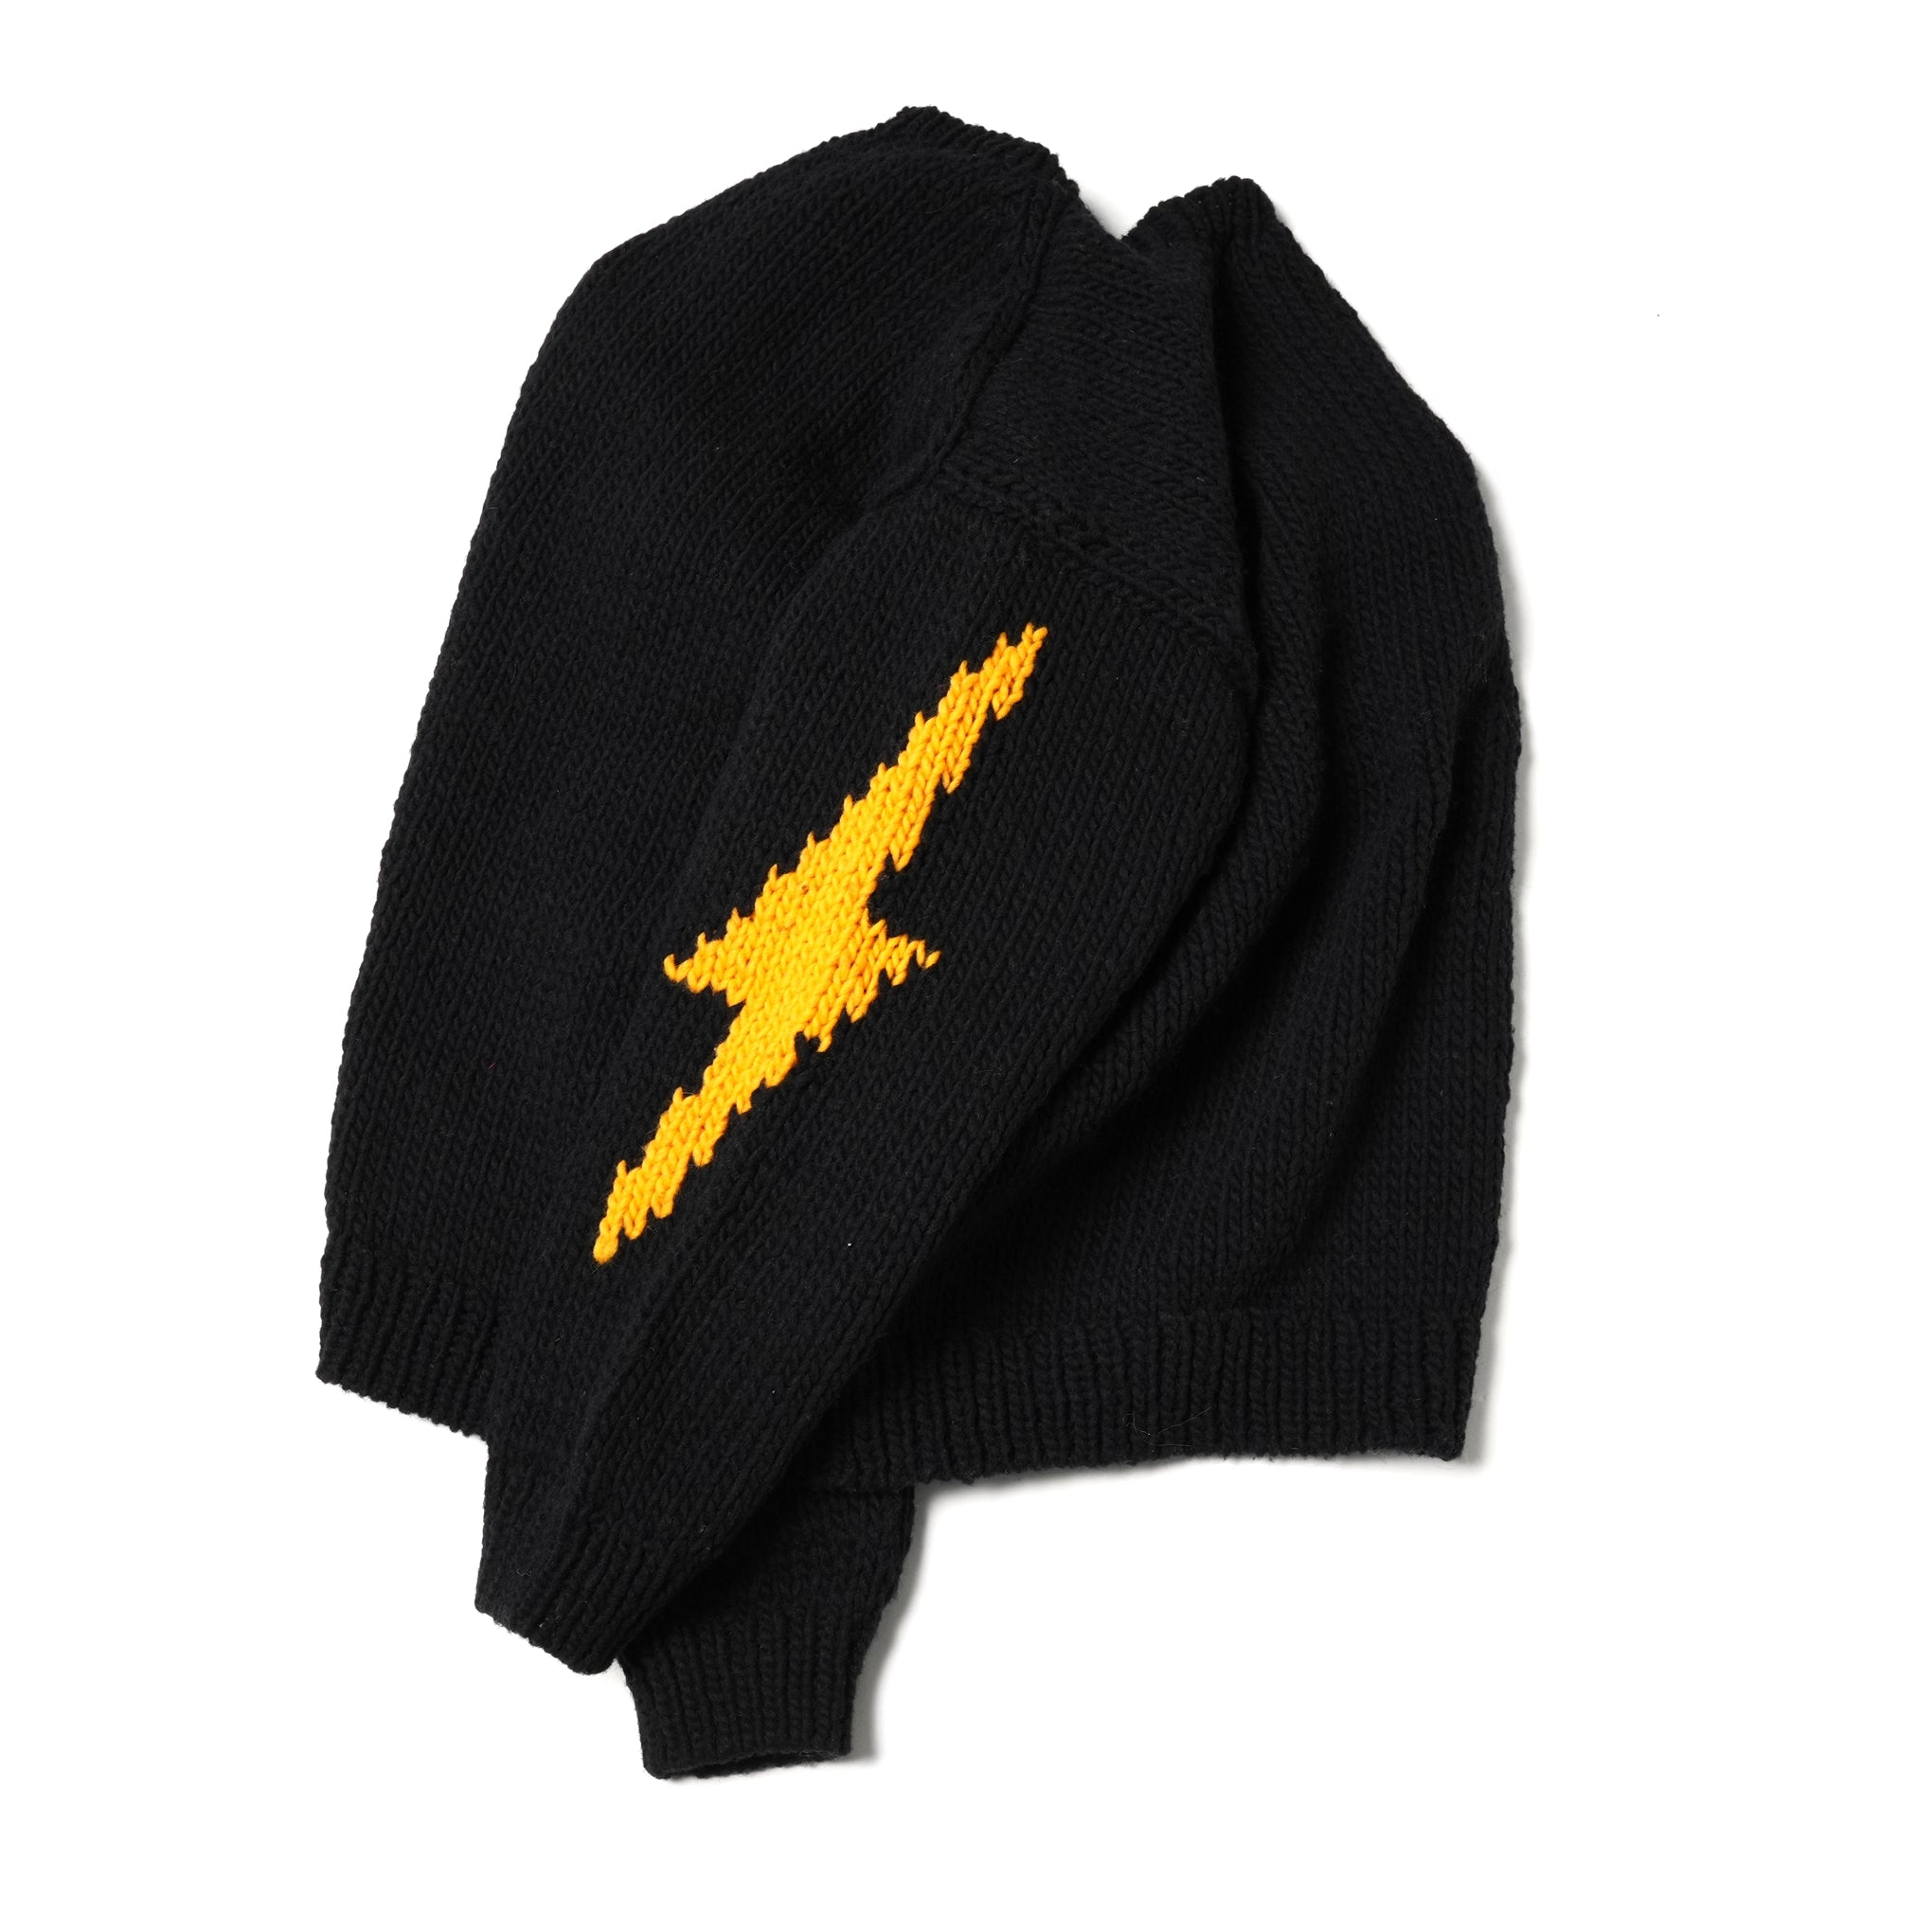 No:tl23f003a | Name:lightning hand knit crew | Color:Black【THRIFTY LOOK_スリフティールック】【入荷予定アイテム・入荷連絡可能】